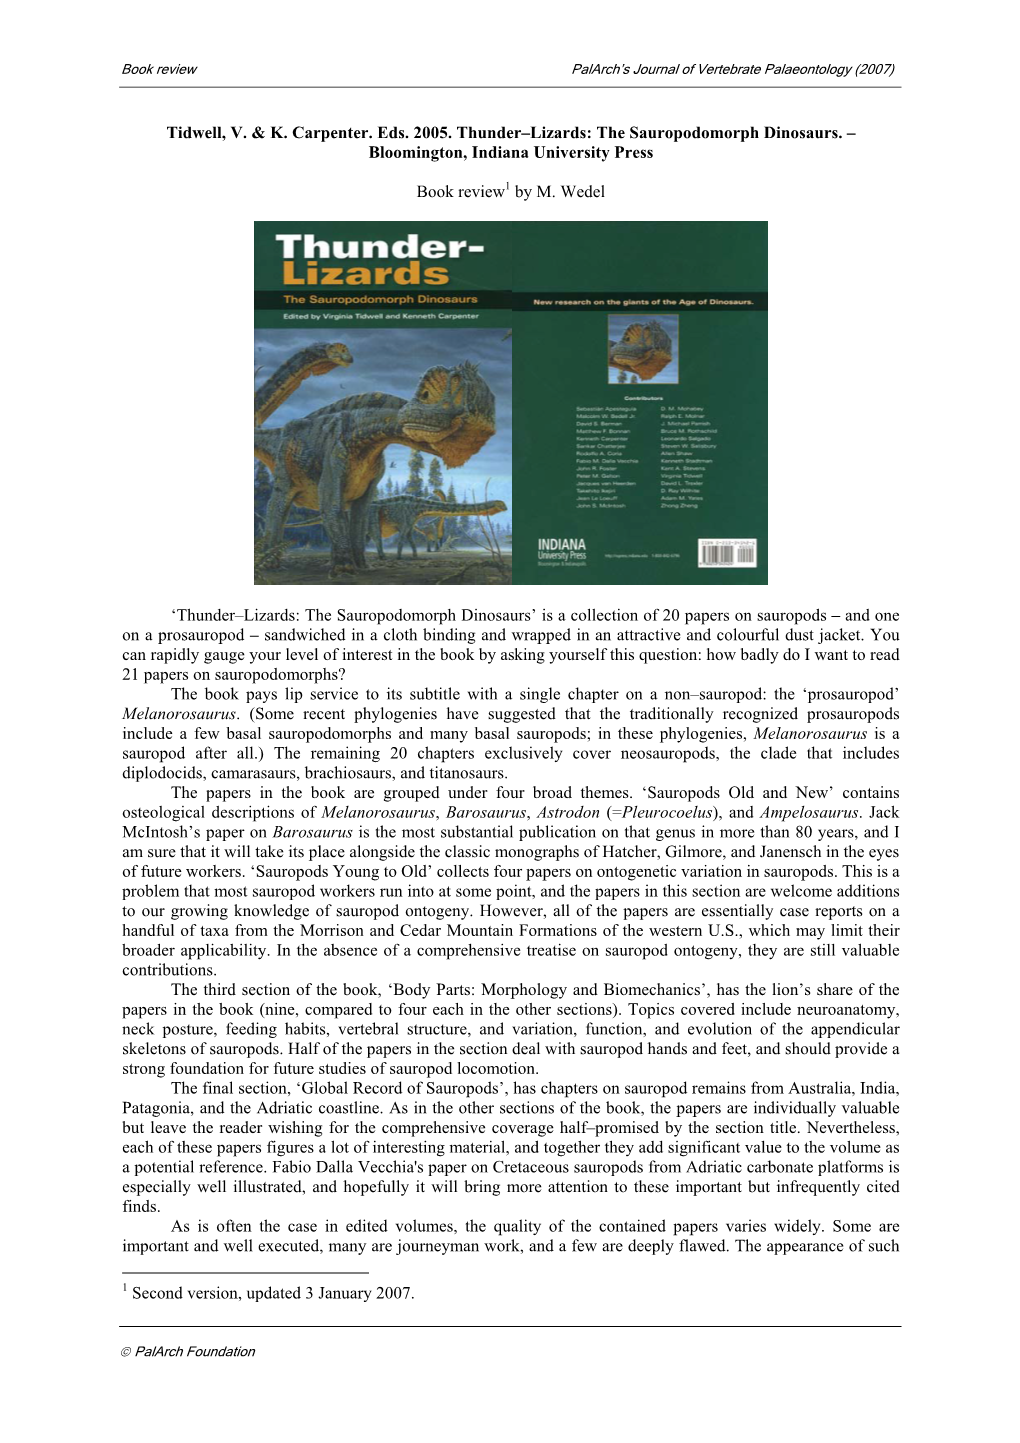 Wedel 2007 Thunder-Lizards Review